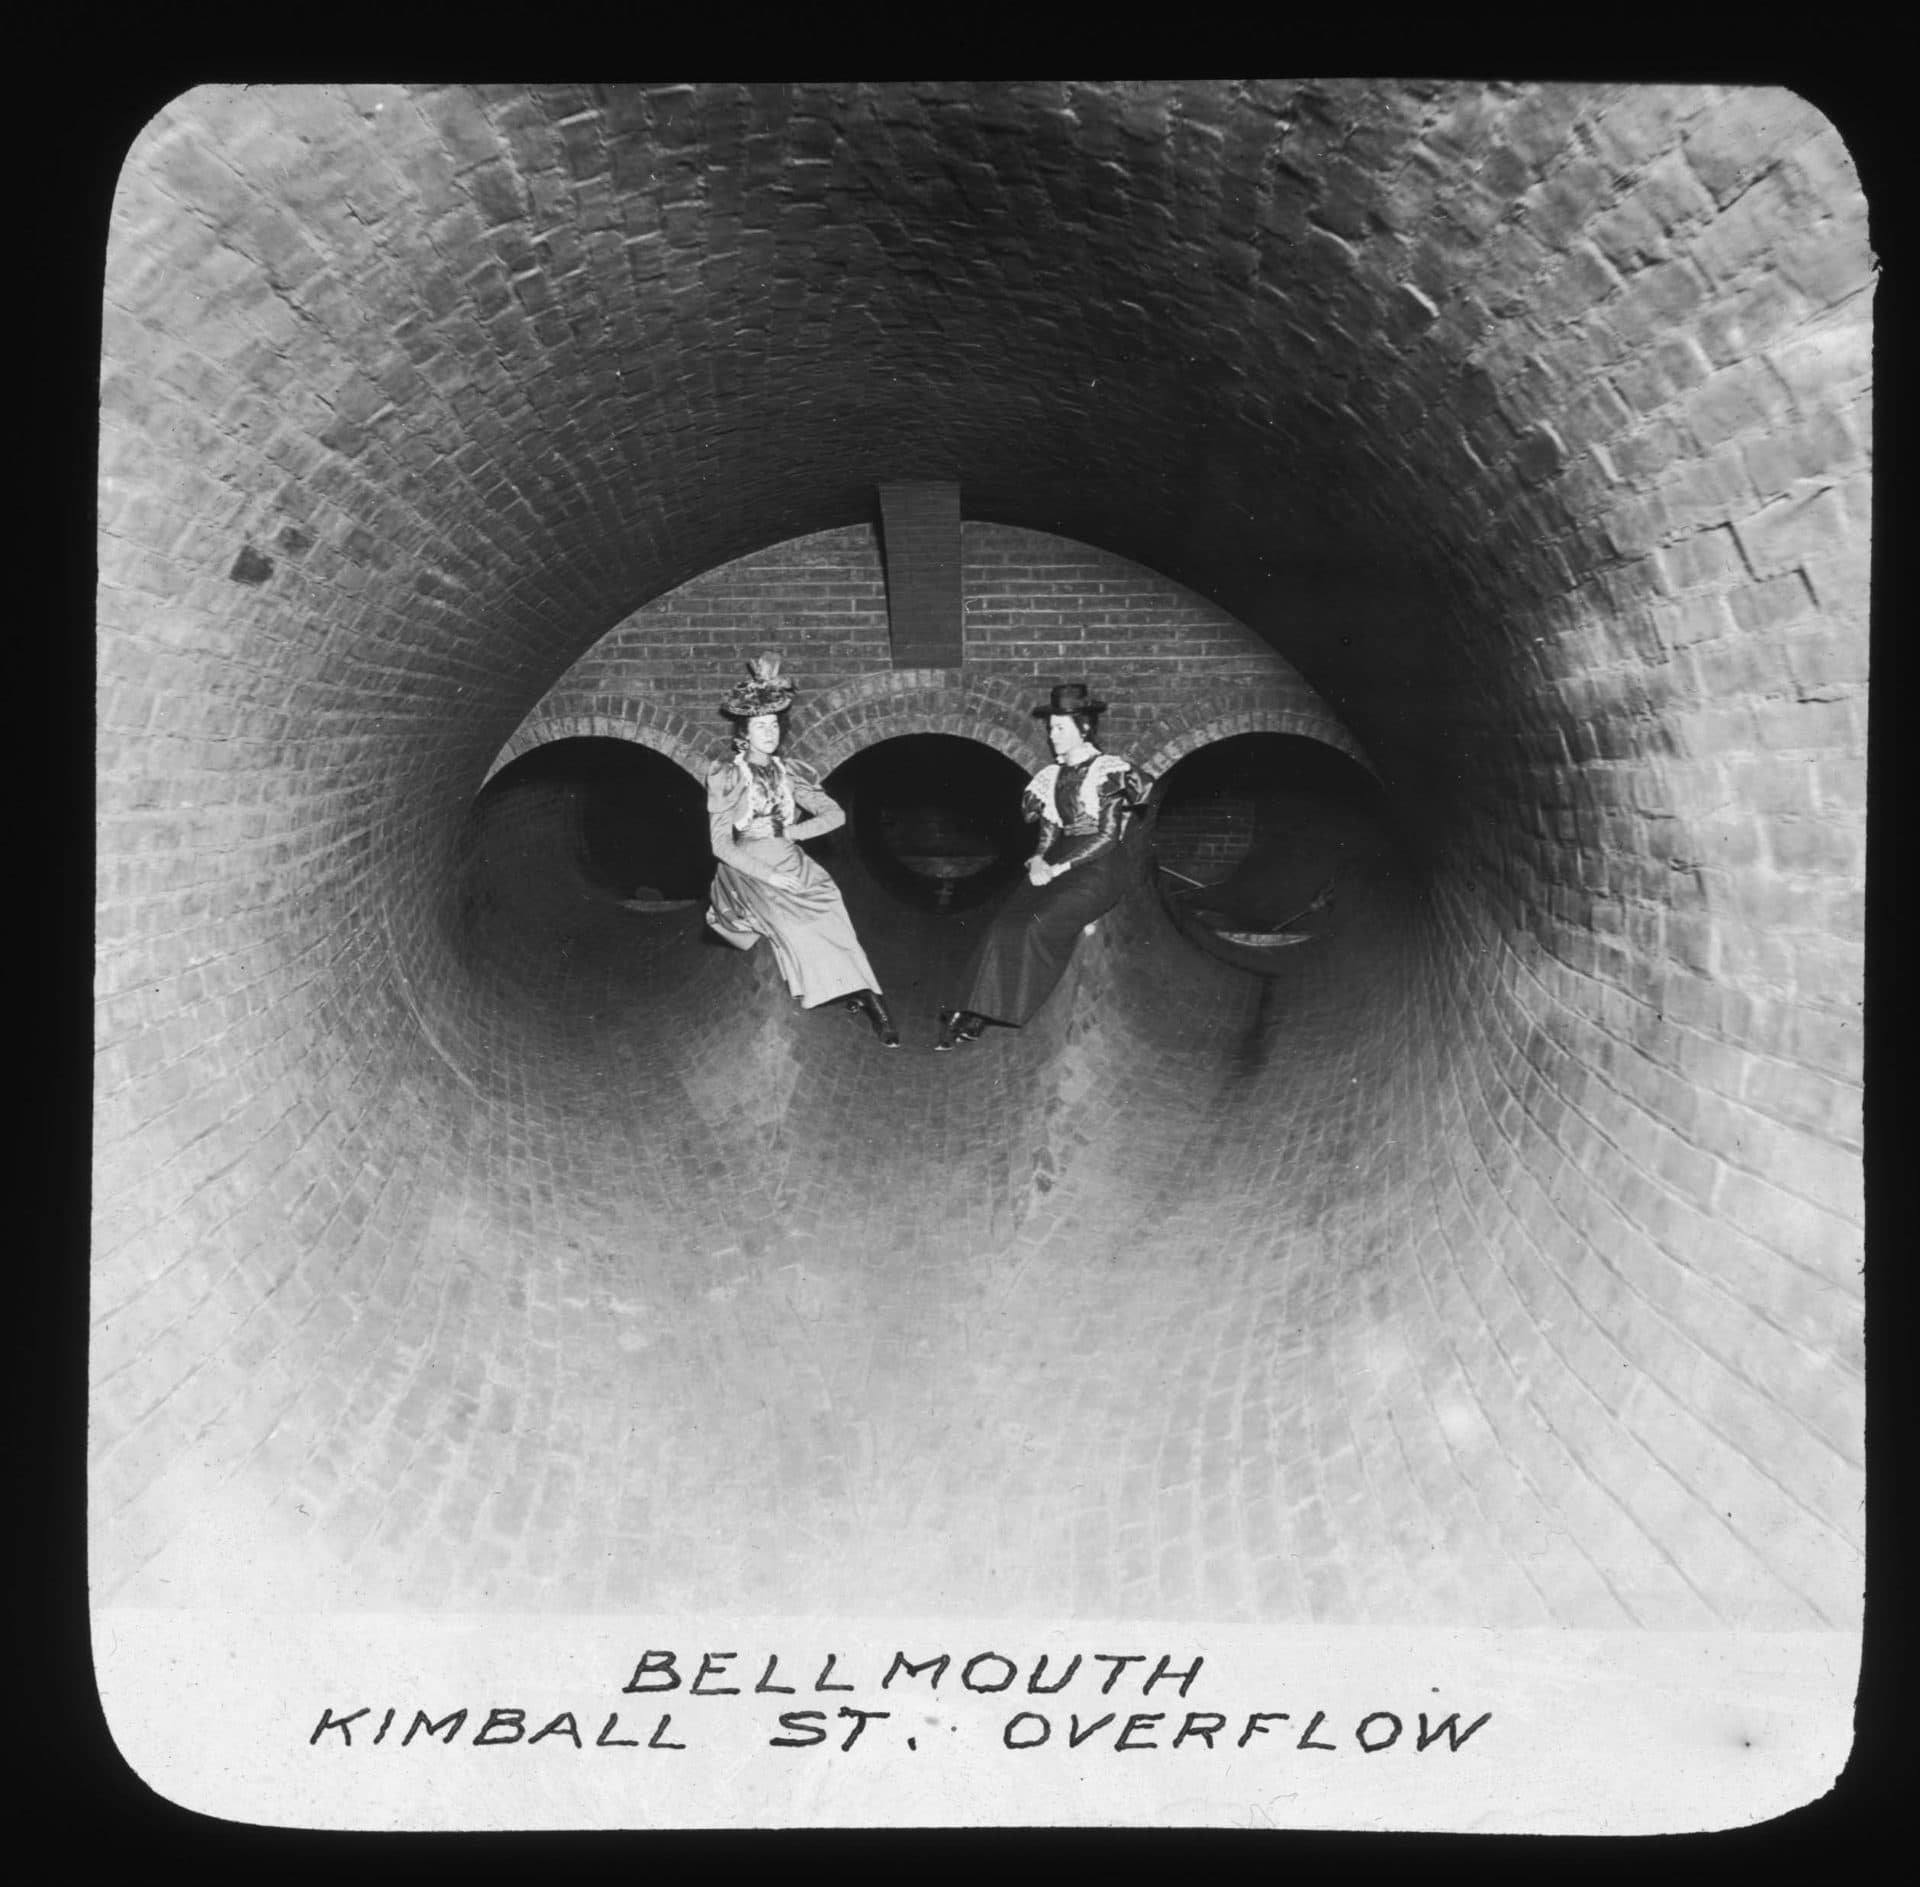 Two women sit inside a Boston sewer pipe in the 1880s. (Courtesy Boston Public Library)